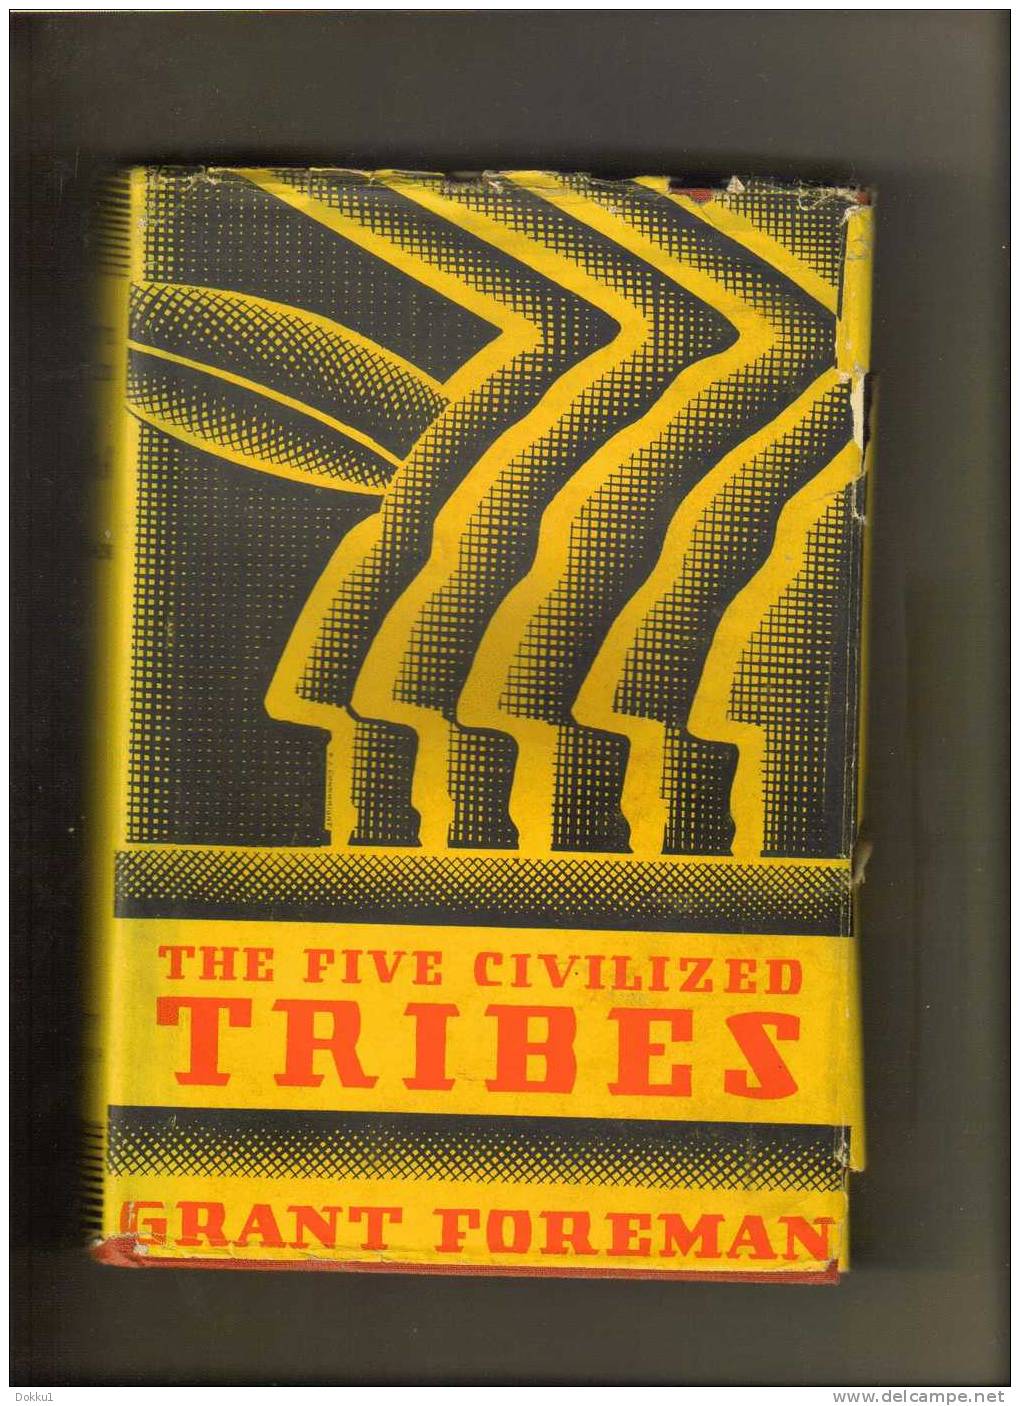 The Five Civilized Tribes - Grant Foreman - University Oklahoma Press -  First Edition 1934 - Encyclopedias